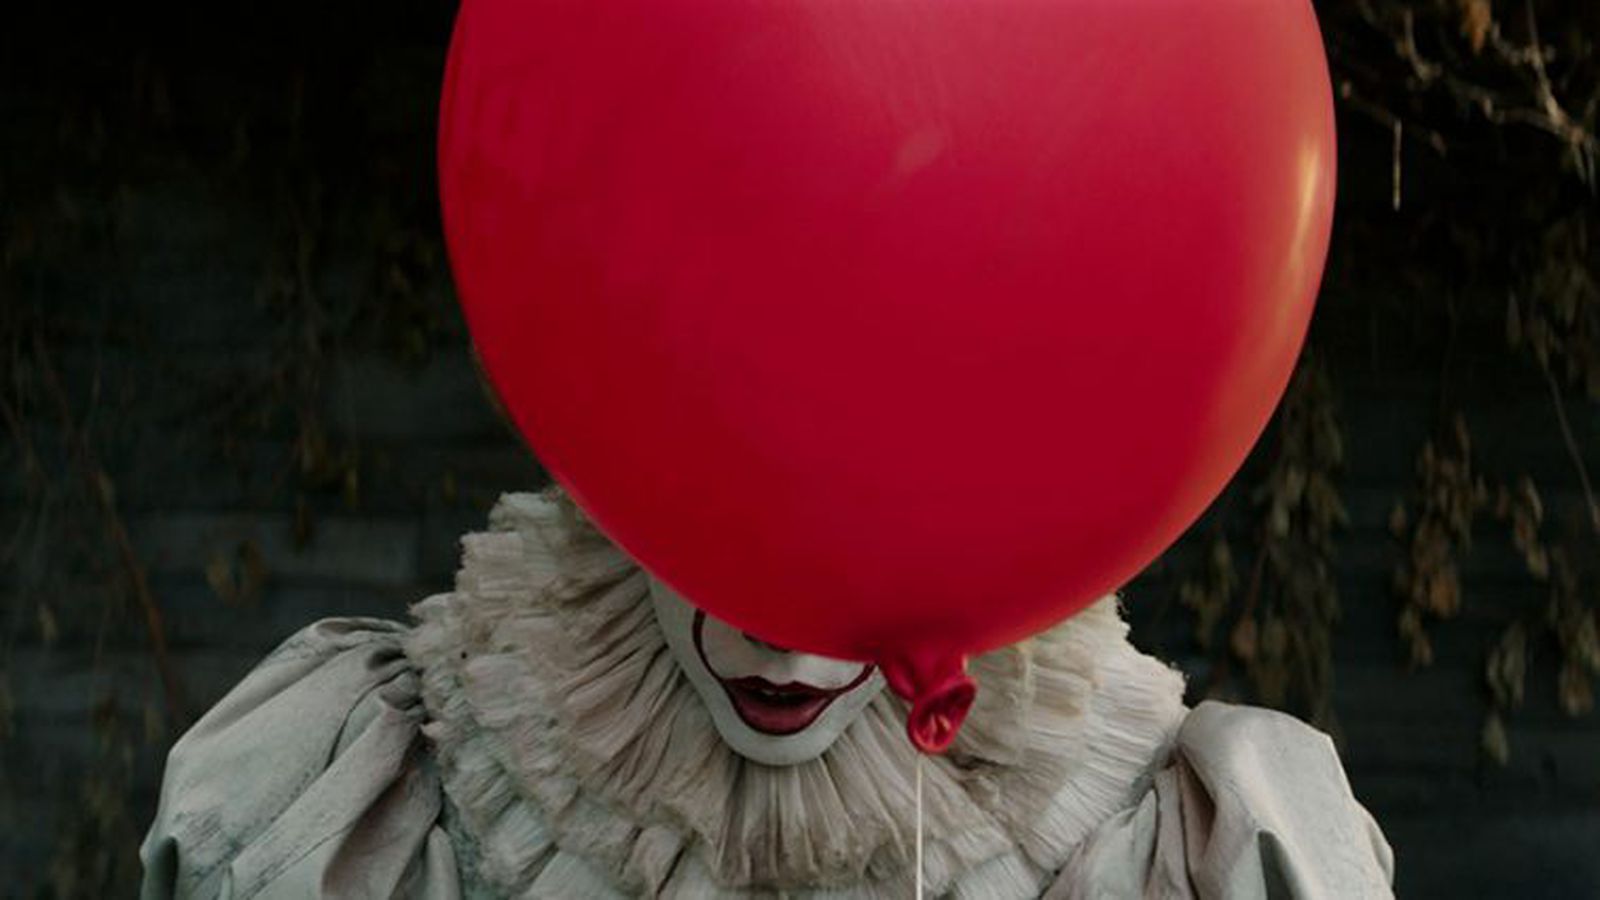 Alamo Drafthouse Turns Joke Into Actual Clowns Only Screening Of It